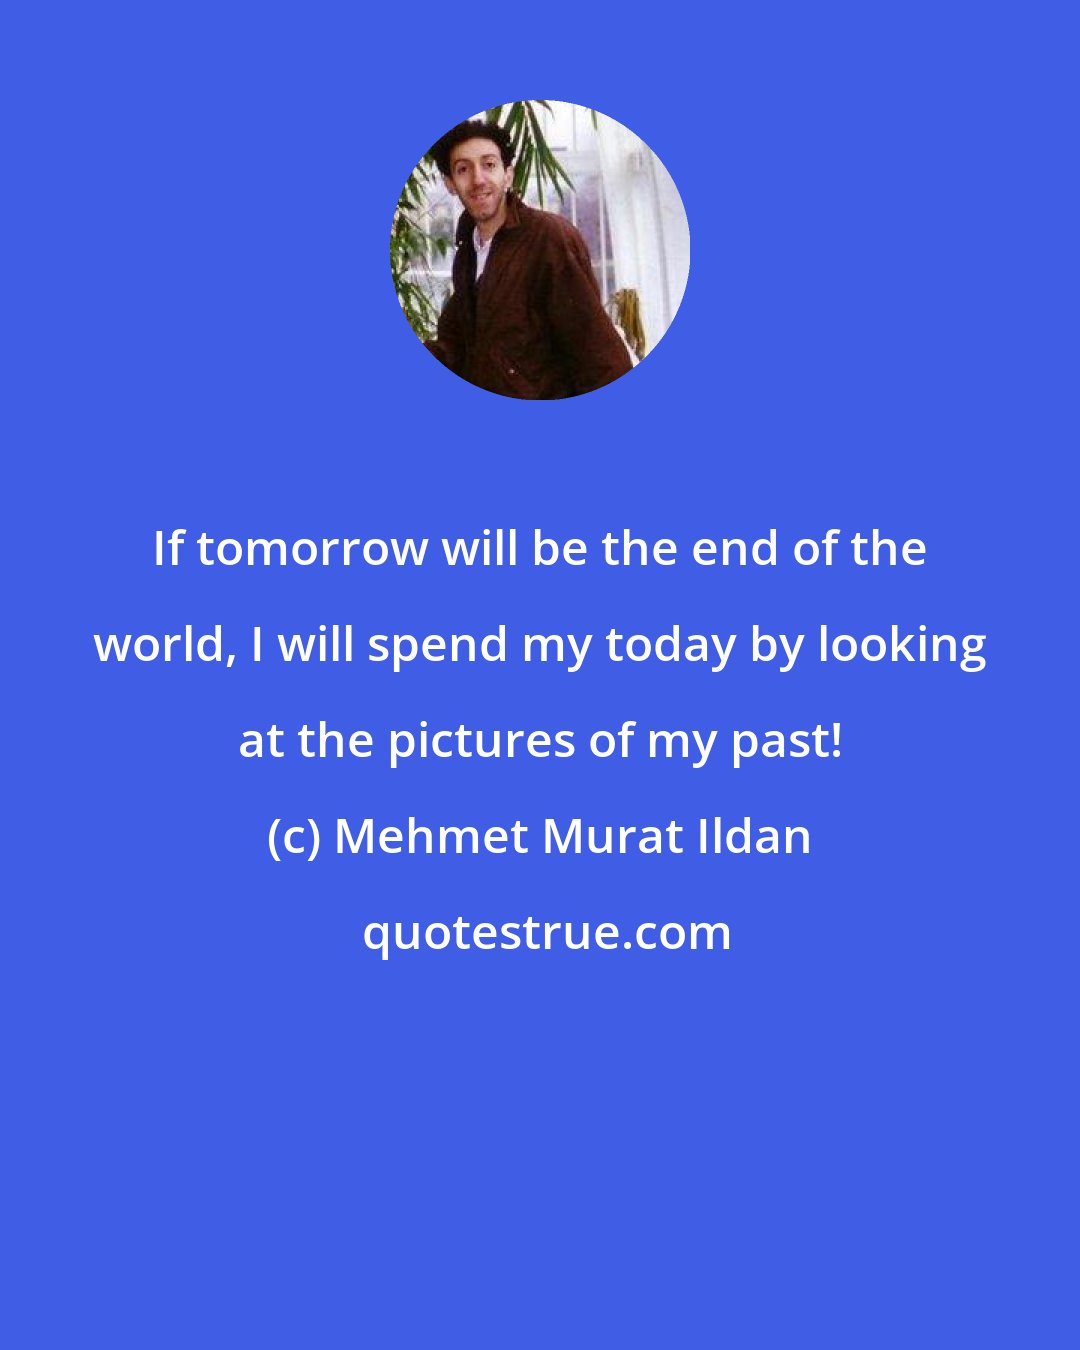 Mehmet Murat Ildan: If tomorrow will be the end of the world, I will spend my today by looking at the pictures of my past!